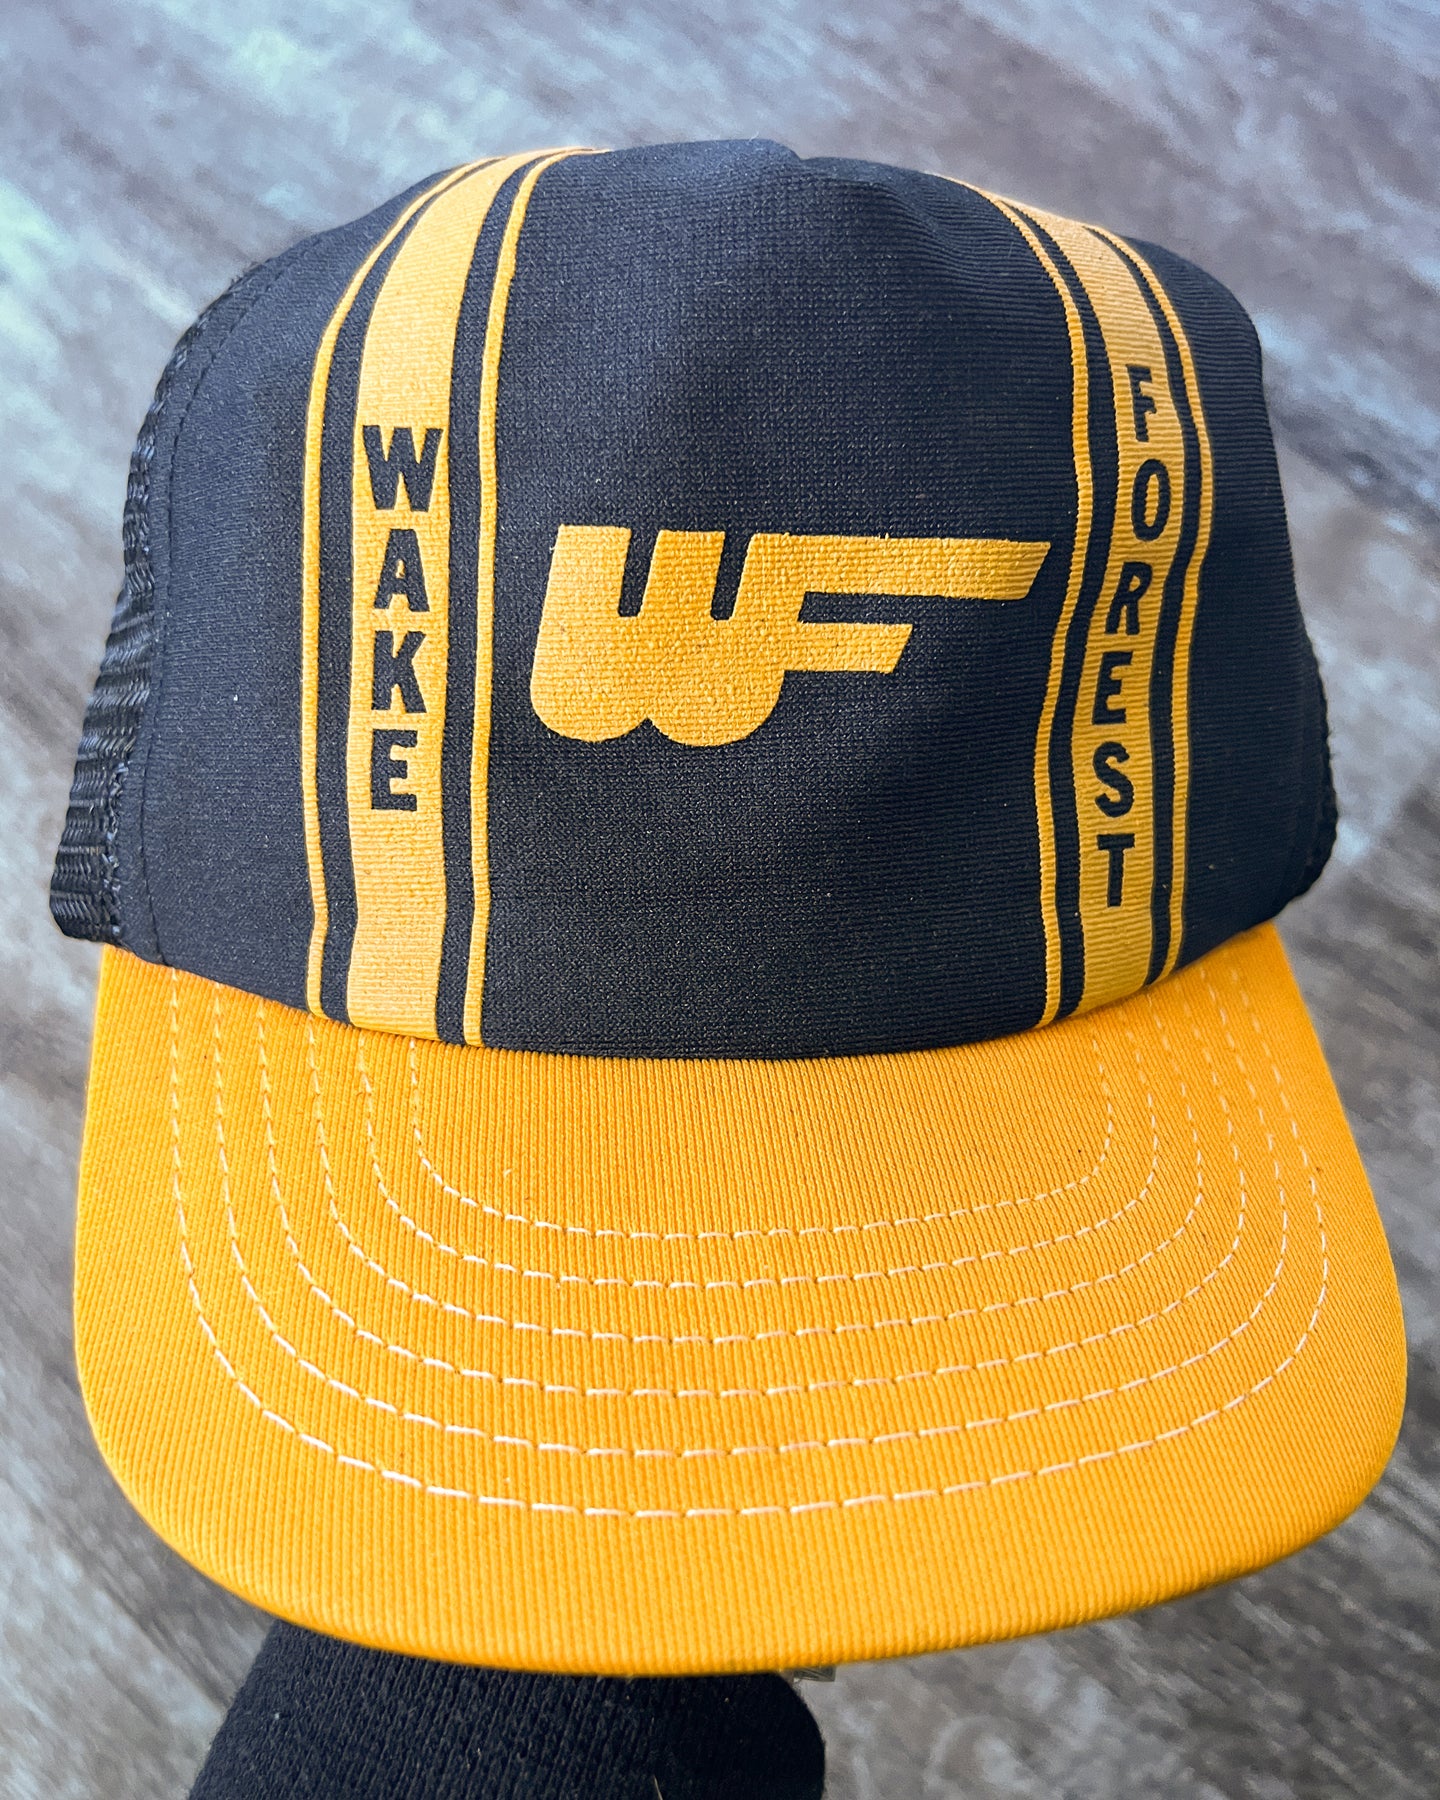 1990s Wake Forest Snapback Trucker - One Size